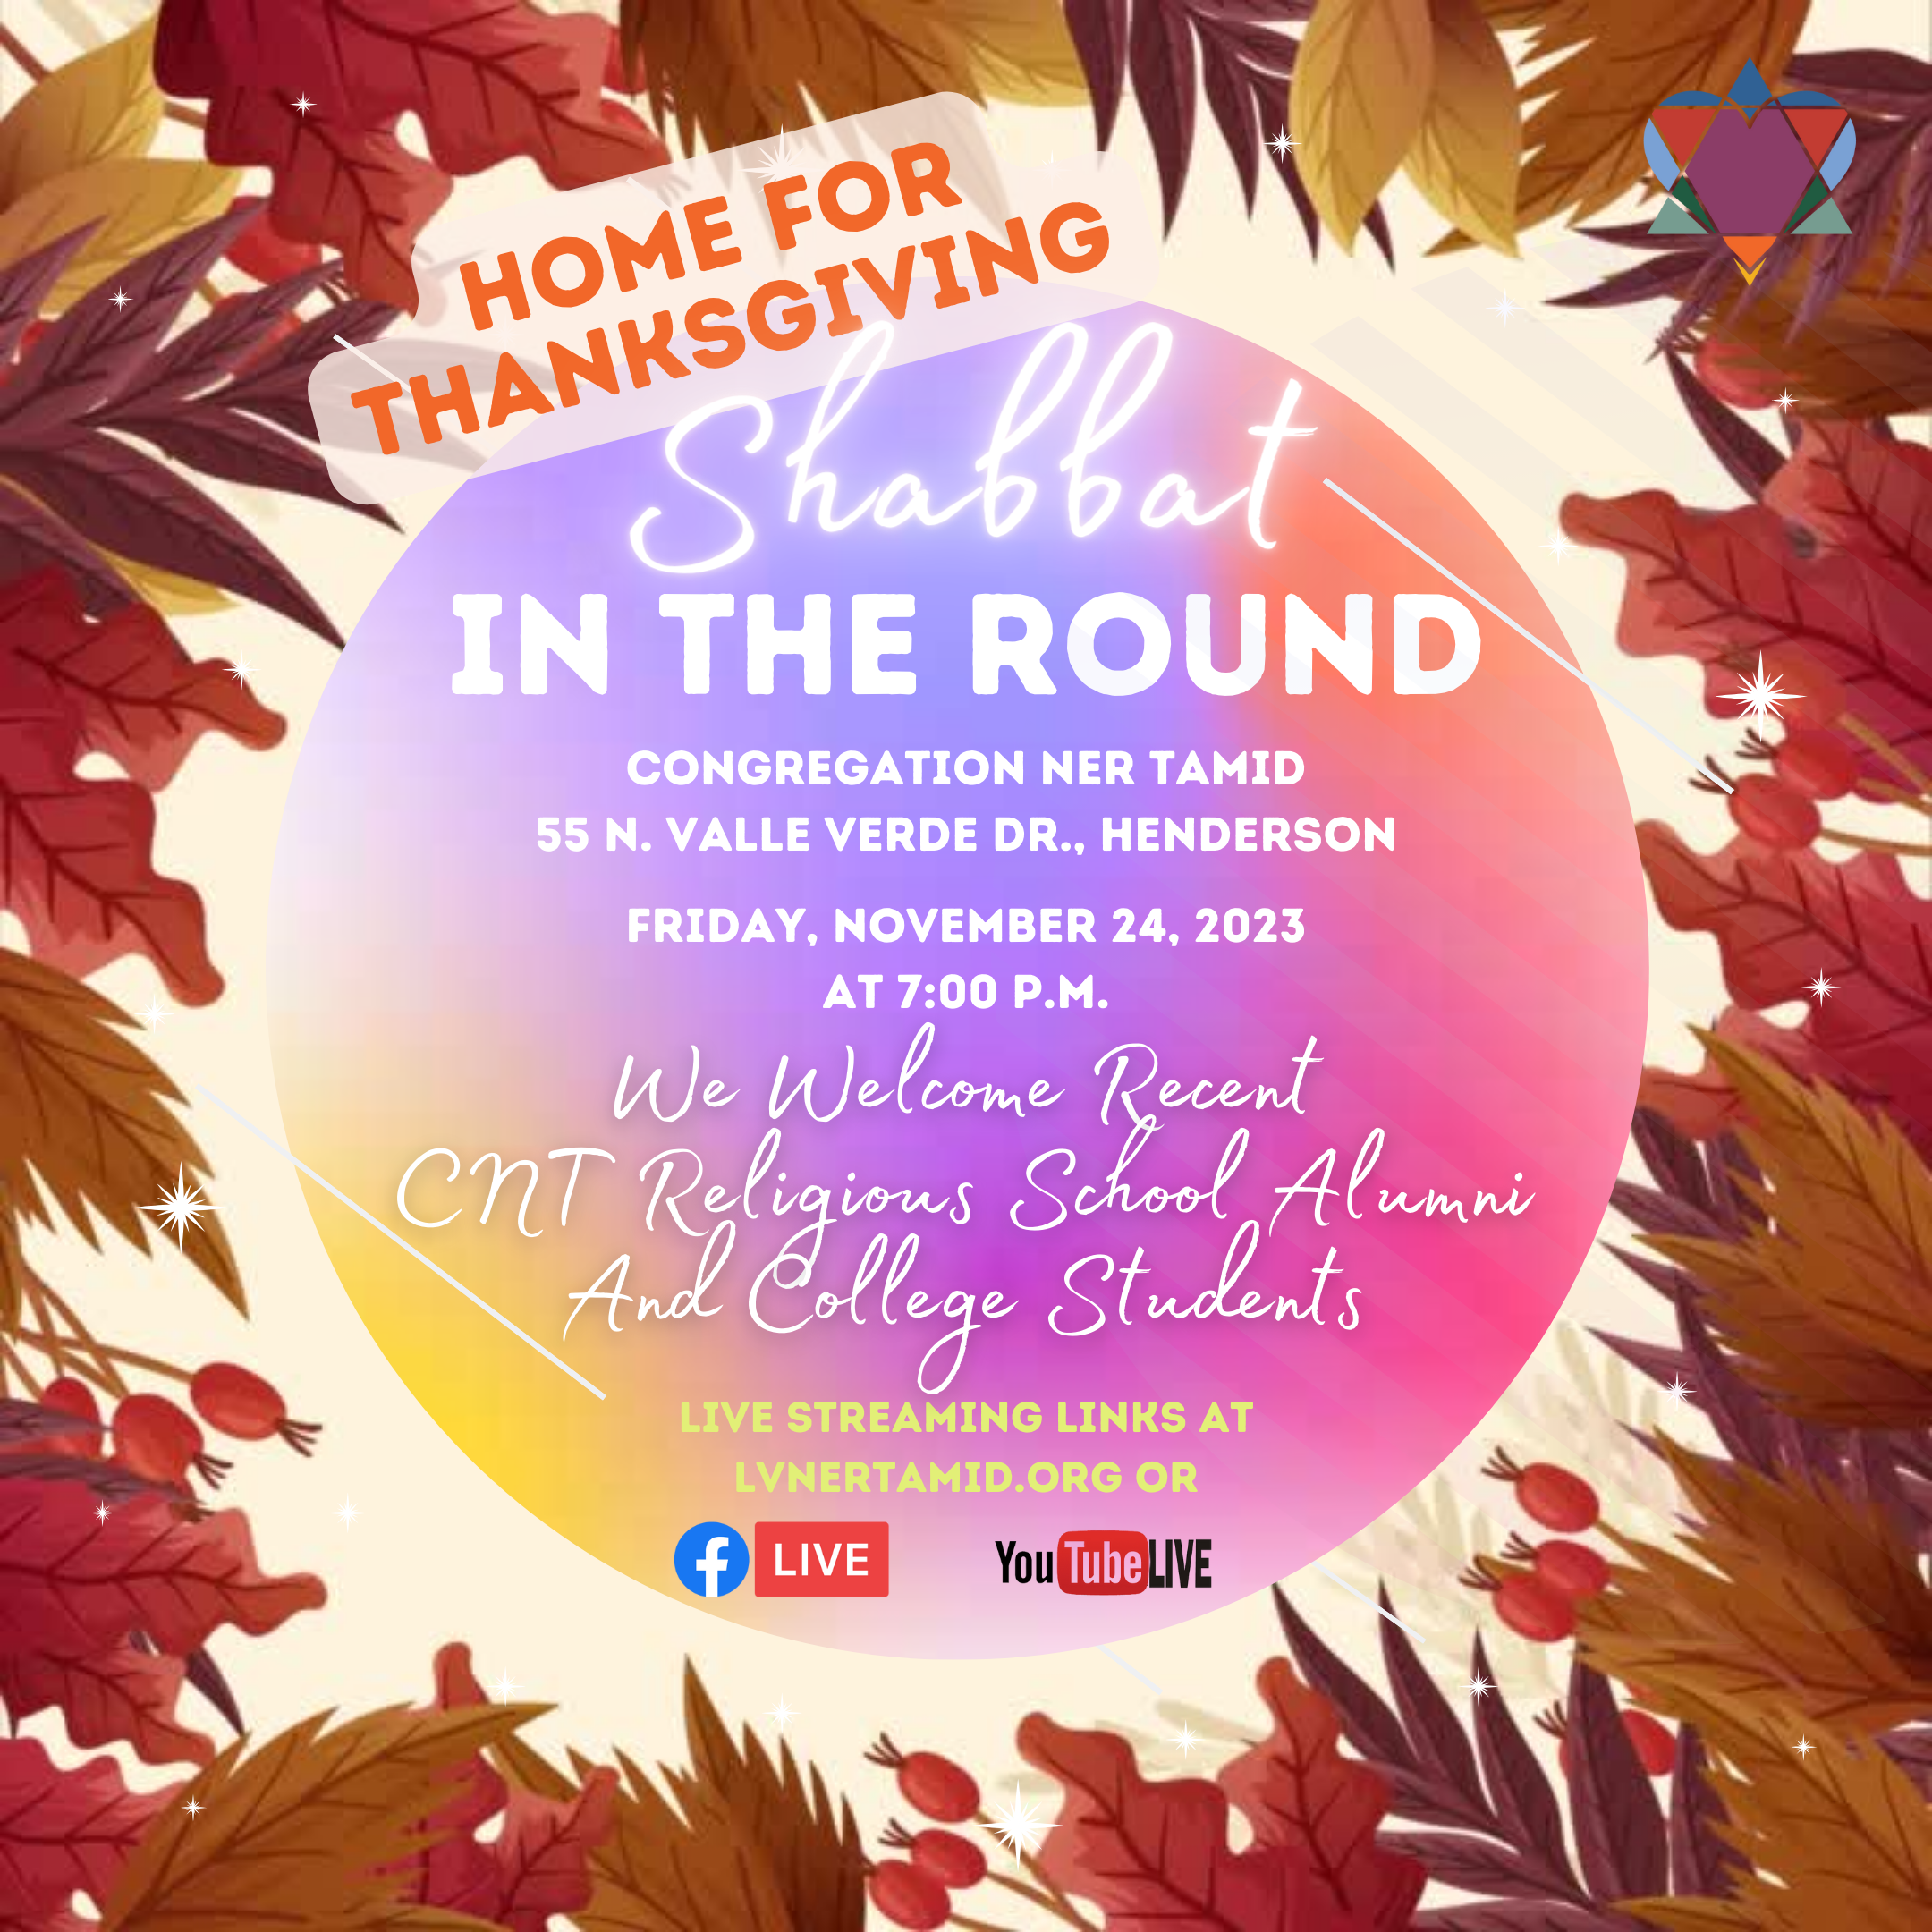 HOME FOR THANKSGIVING SHABBAT IN THE ROUND